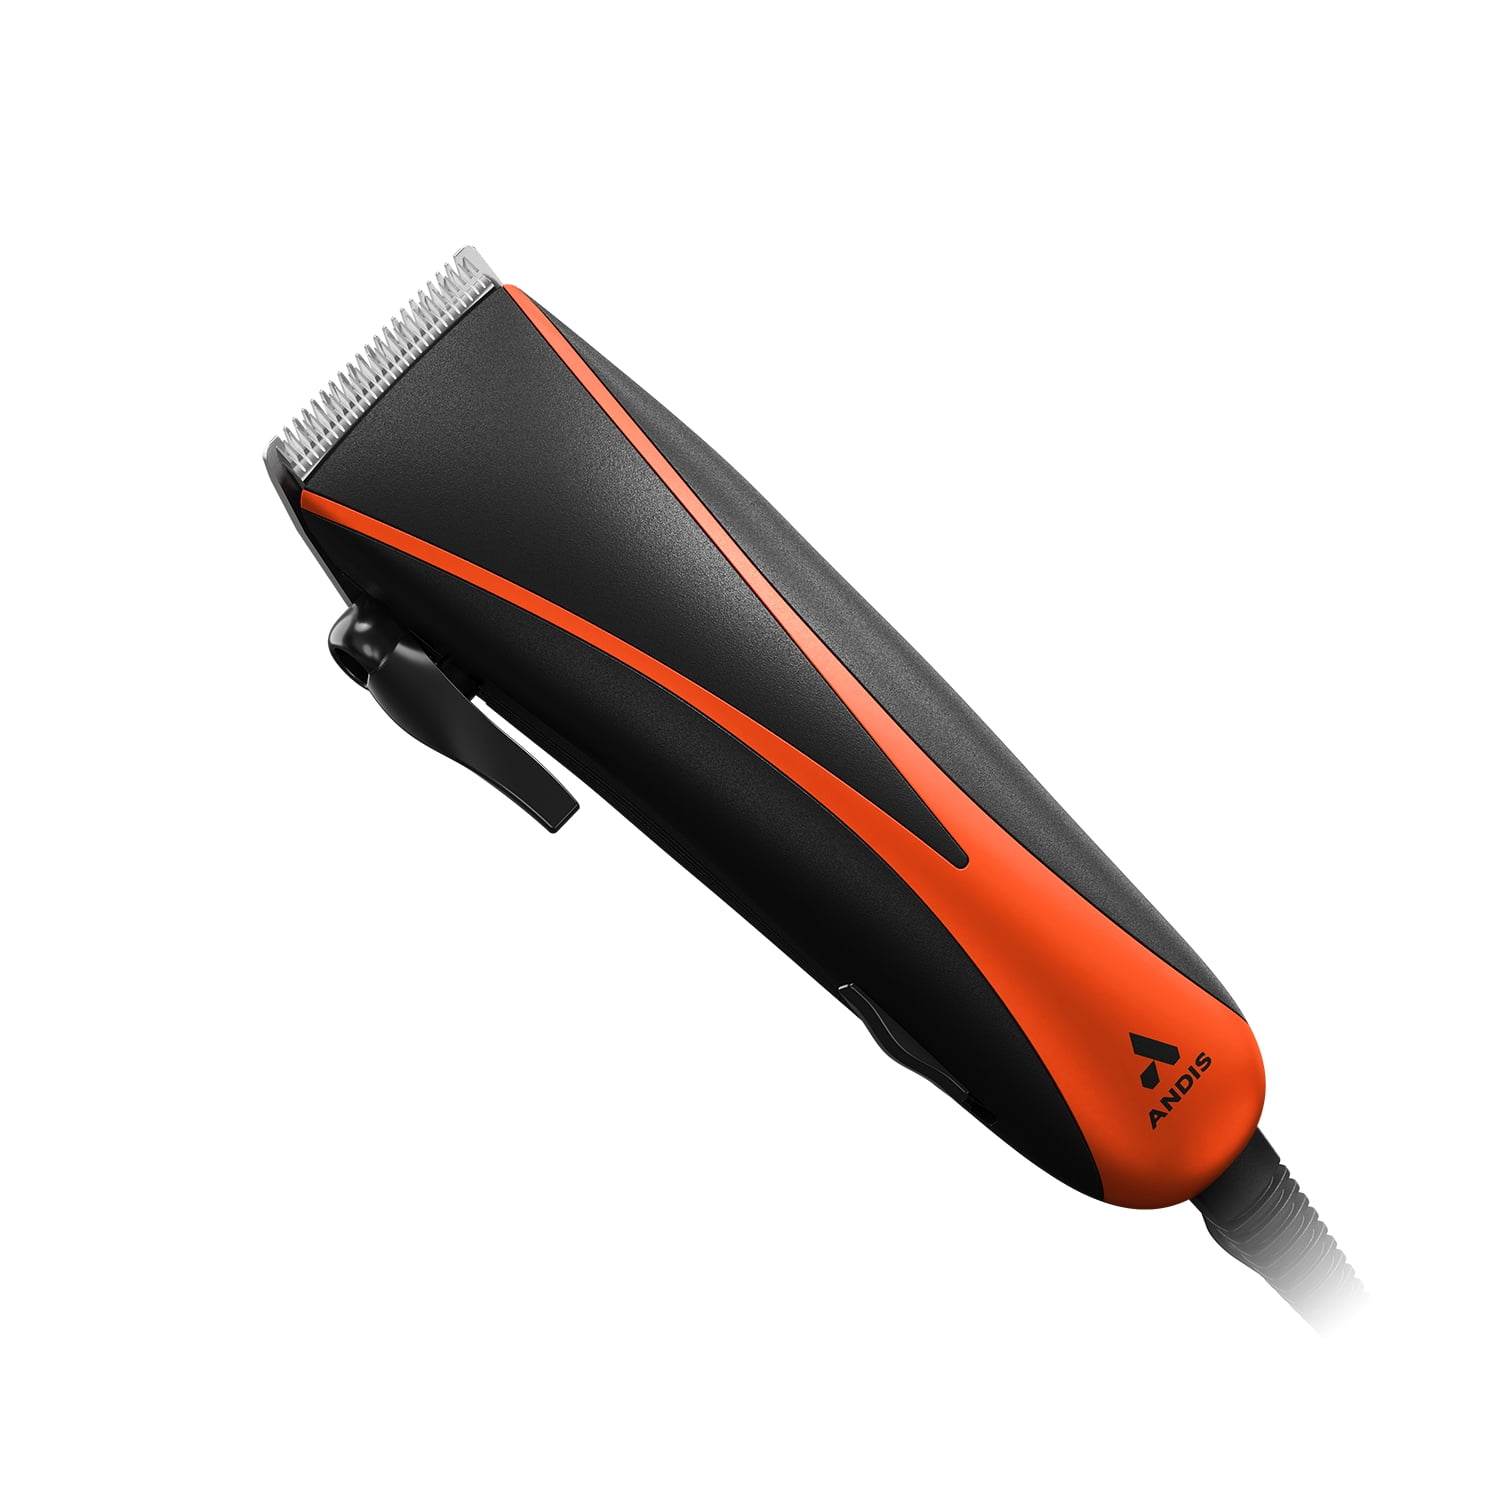 Andis beSPOKE Multi-Speed Cordless Clippers